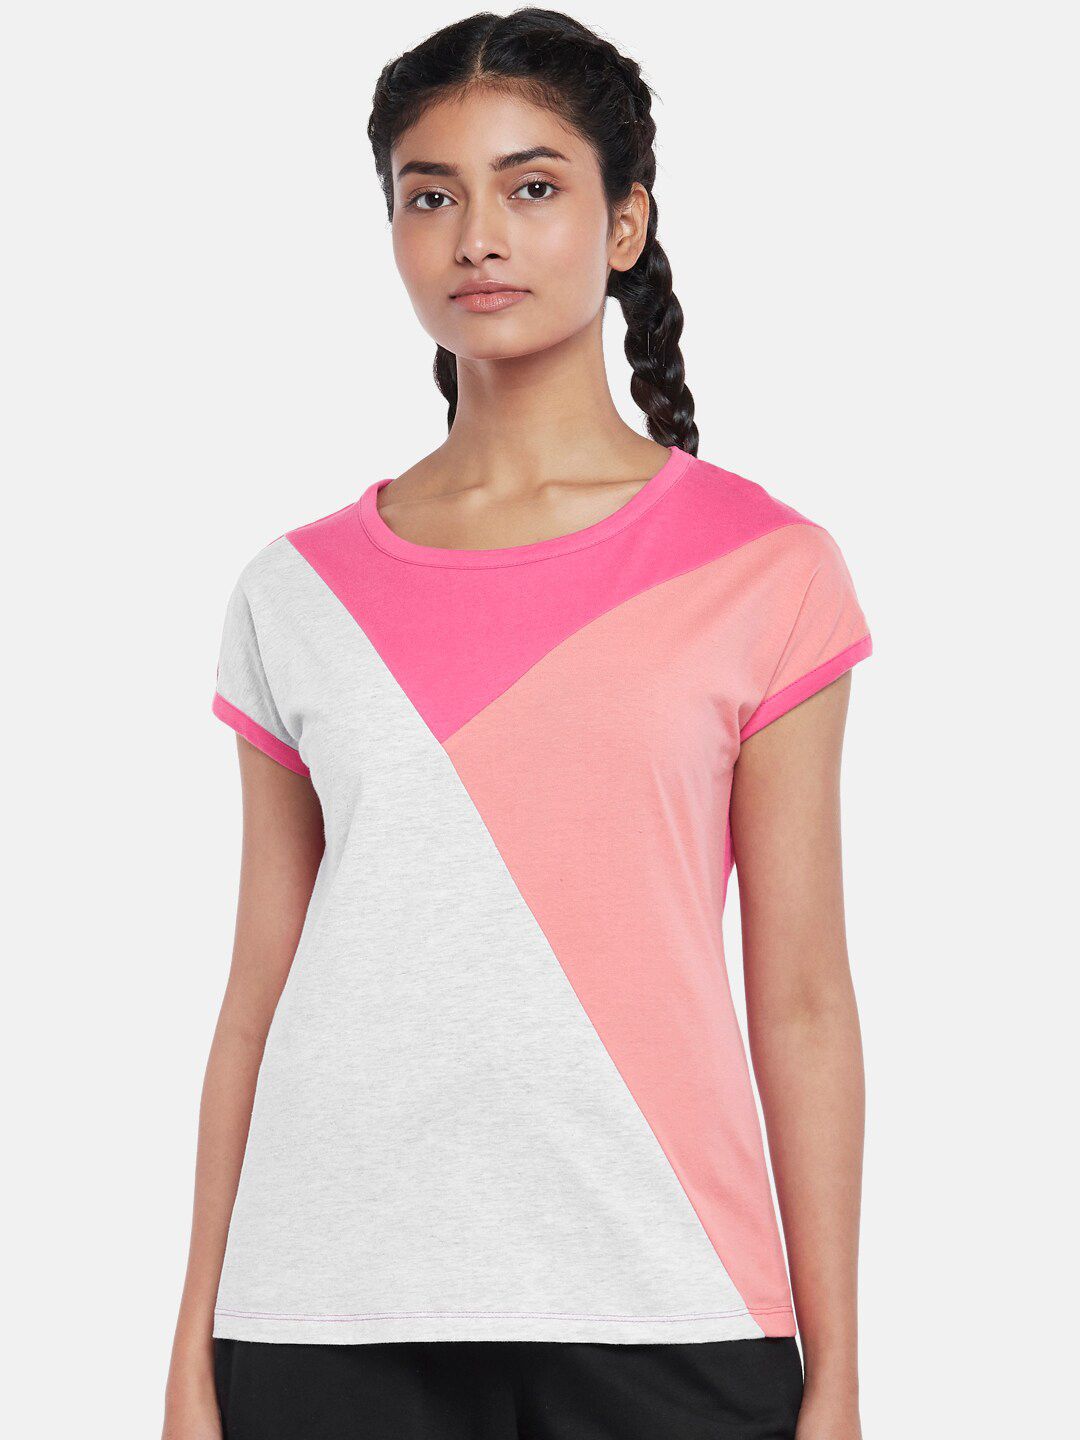 Ajile by Pantaloons Women Pink Colourblocked Extended Sleeves T-shirt Price in India